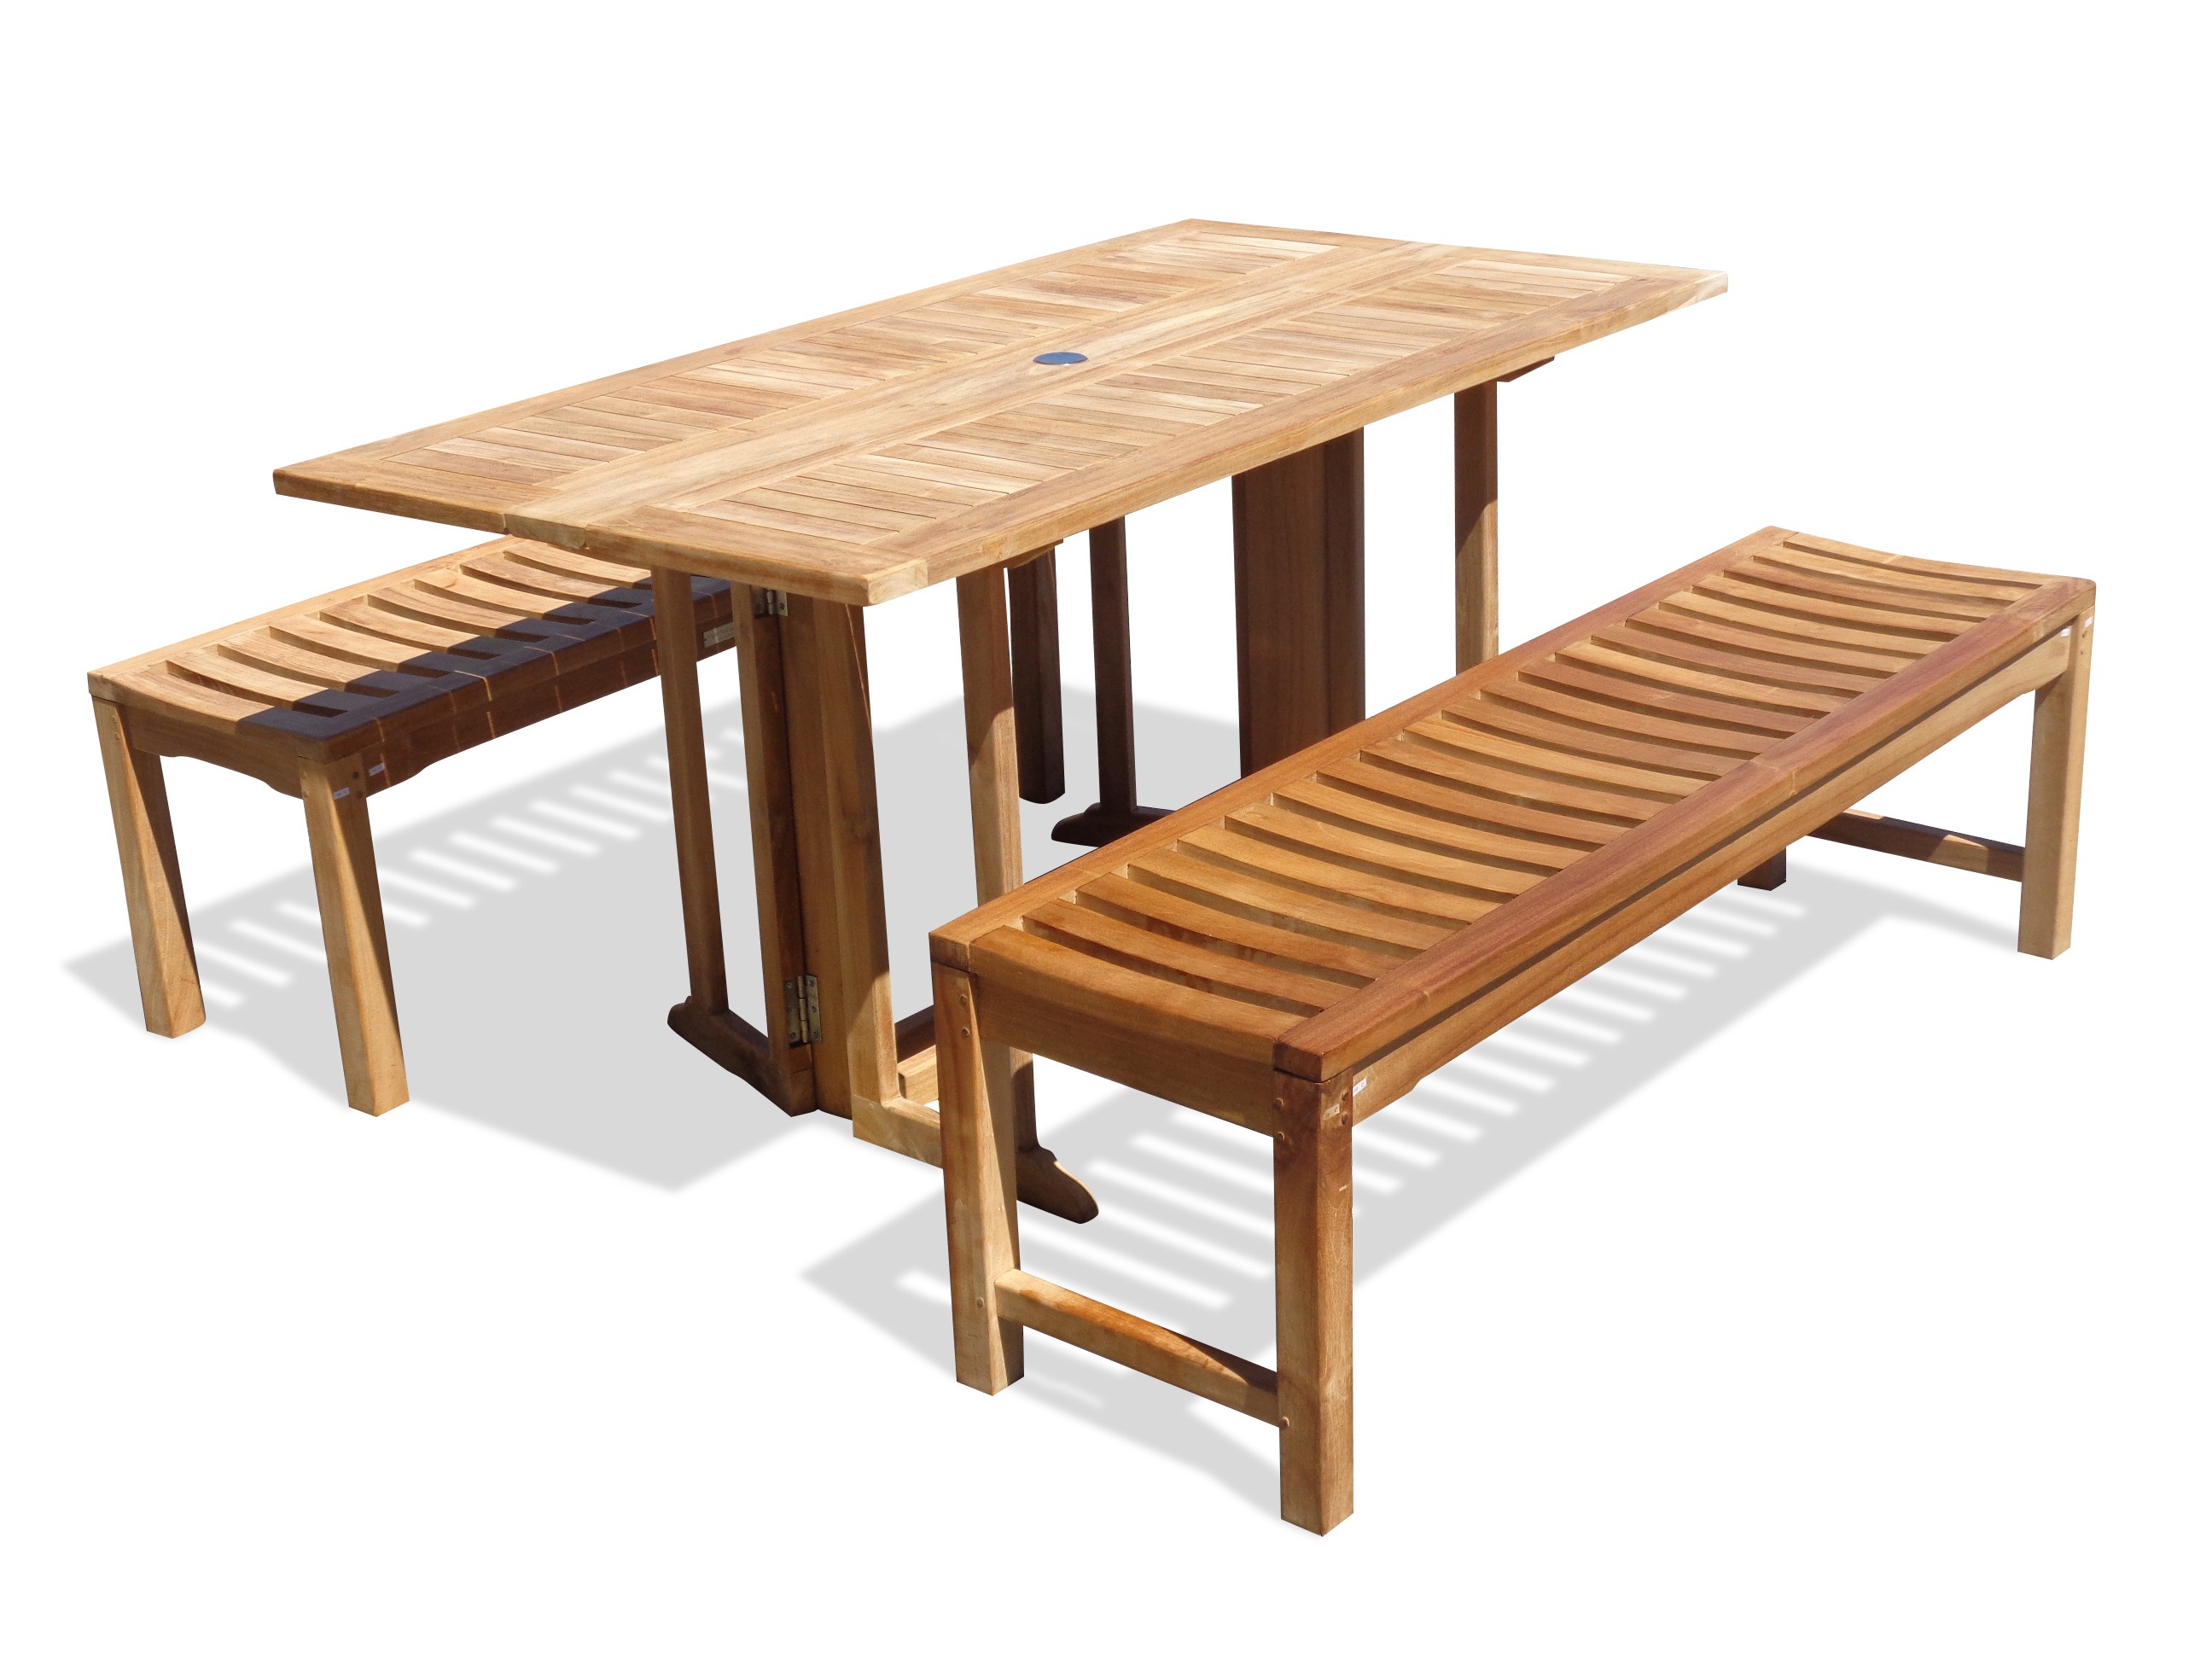 Barcelone 59" x 31" Rectangular Drop Leaf Folding Teak Table W/two 59" Backless Benches...Seats 6 Adults